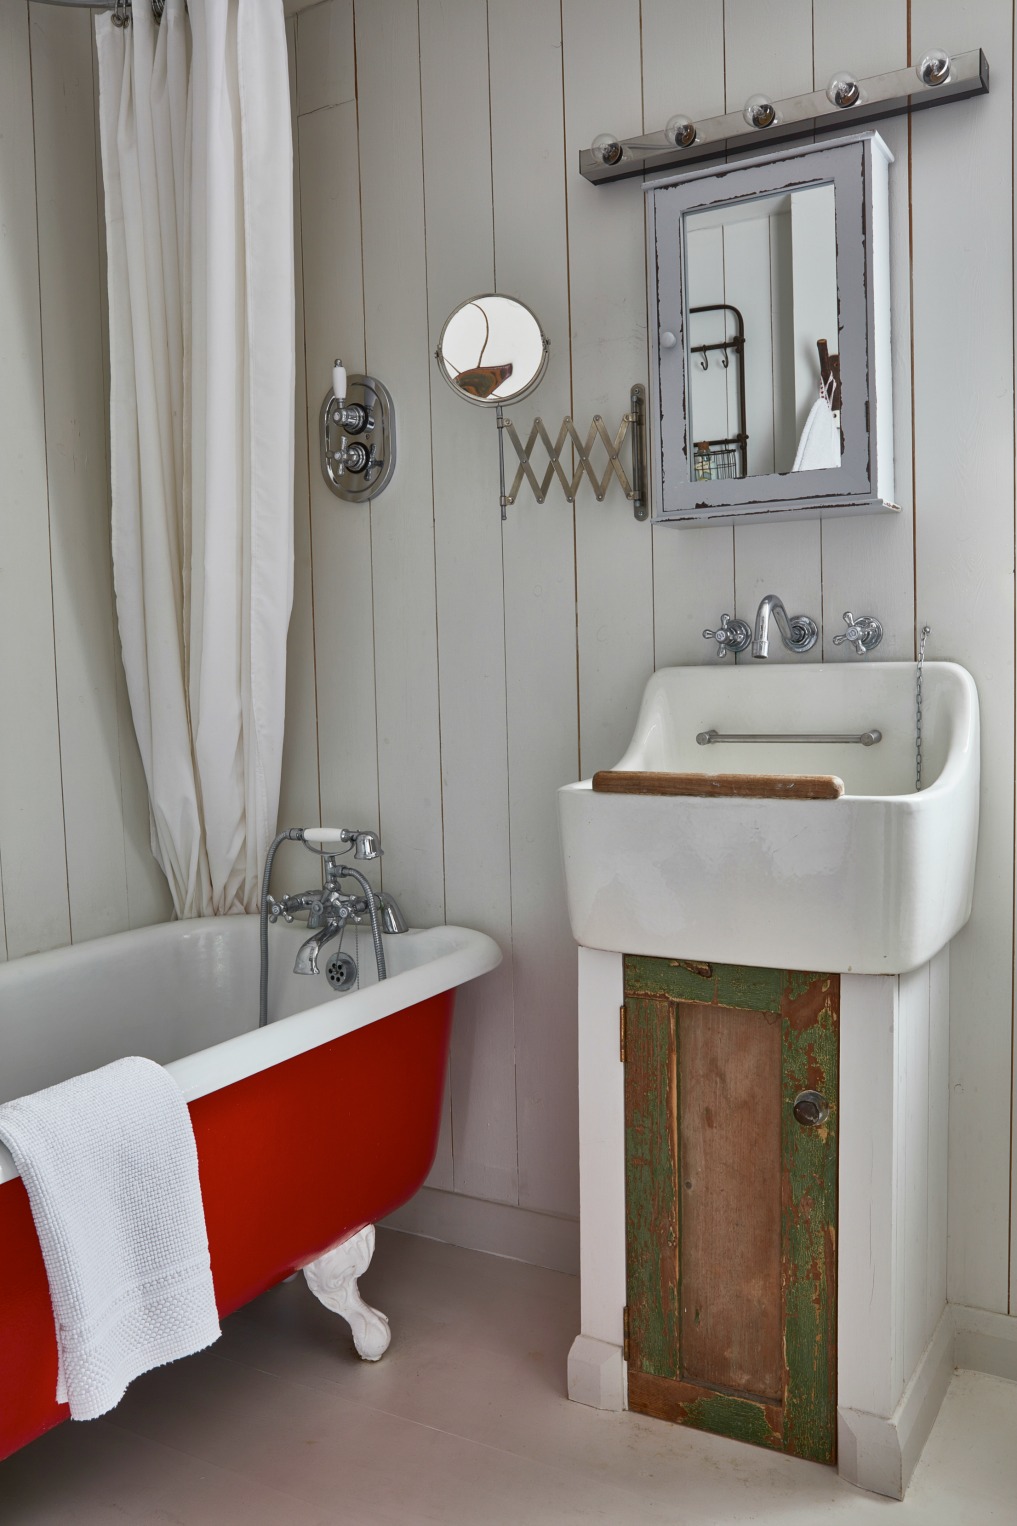 An old claw foot tubs gets a coat of red paint in this cottage bathroom with planked white walls kellyelko.com